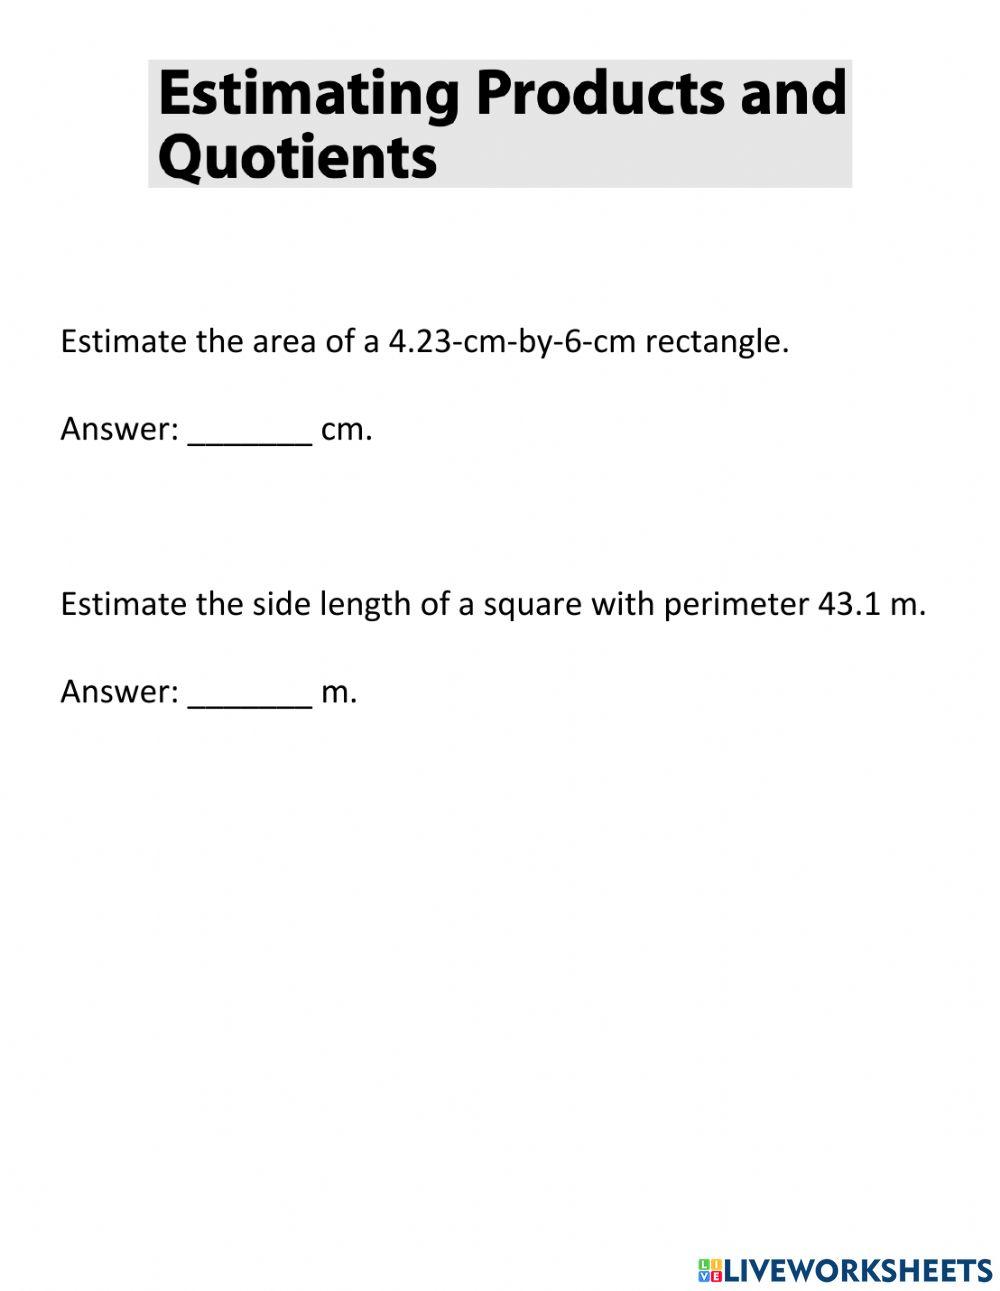 Estimating Products and Quotients - 7